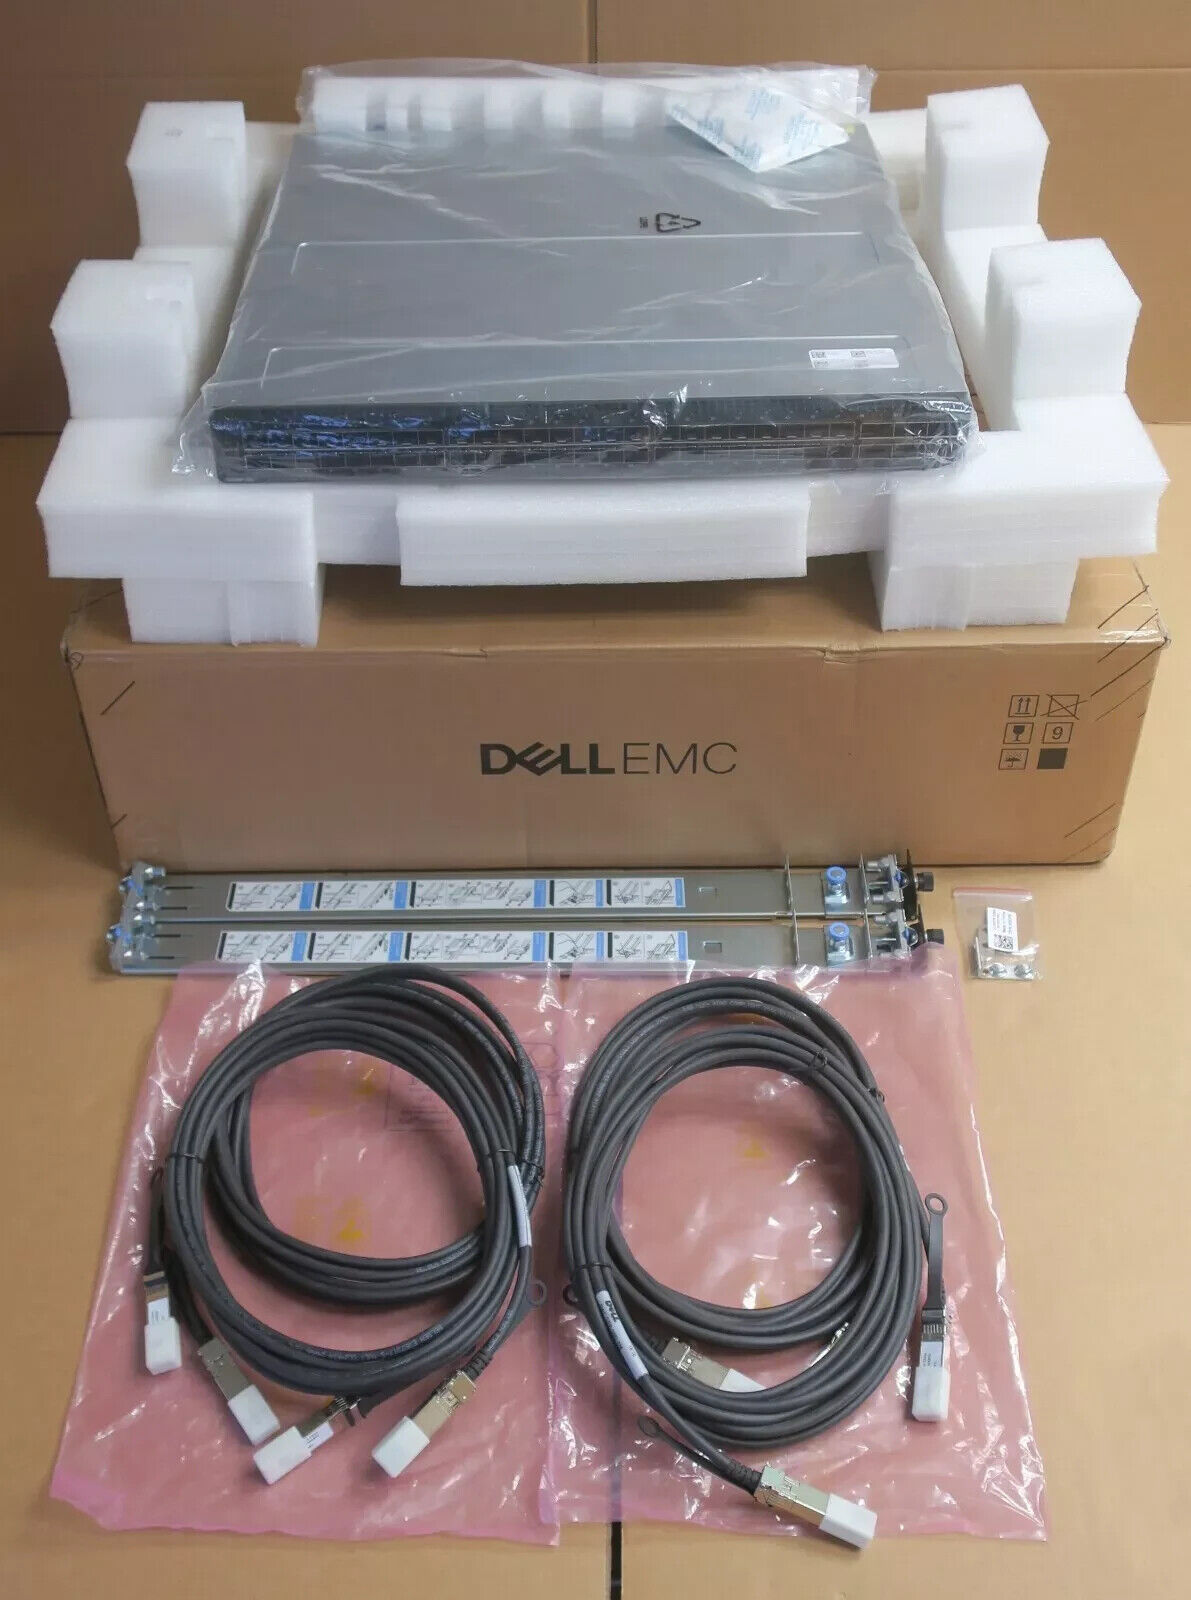 NEW Dell Networking S5048F-ON 48x 25GbE SFP28 + 6x 100GbE QSFP28 L3 Switch OS9